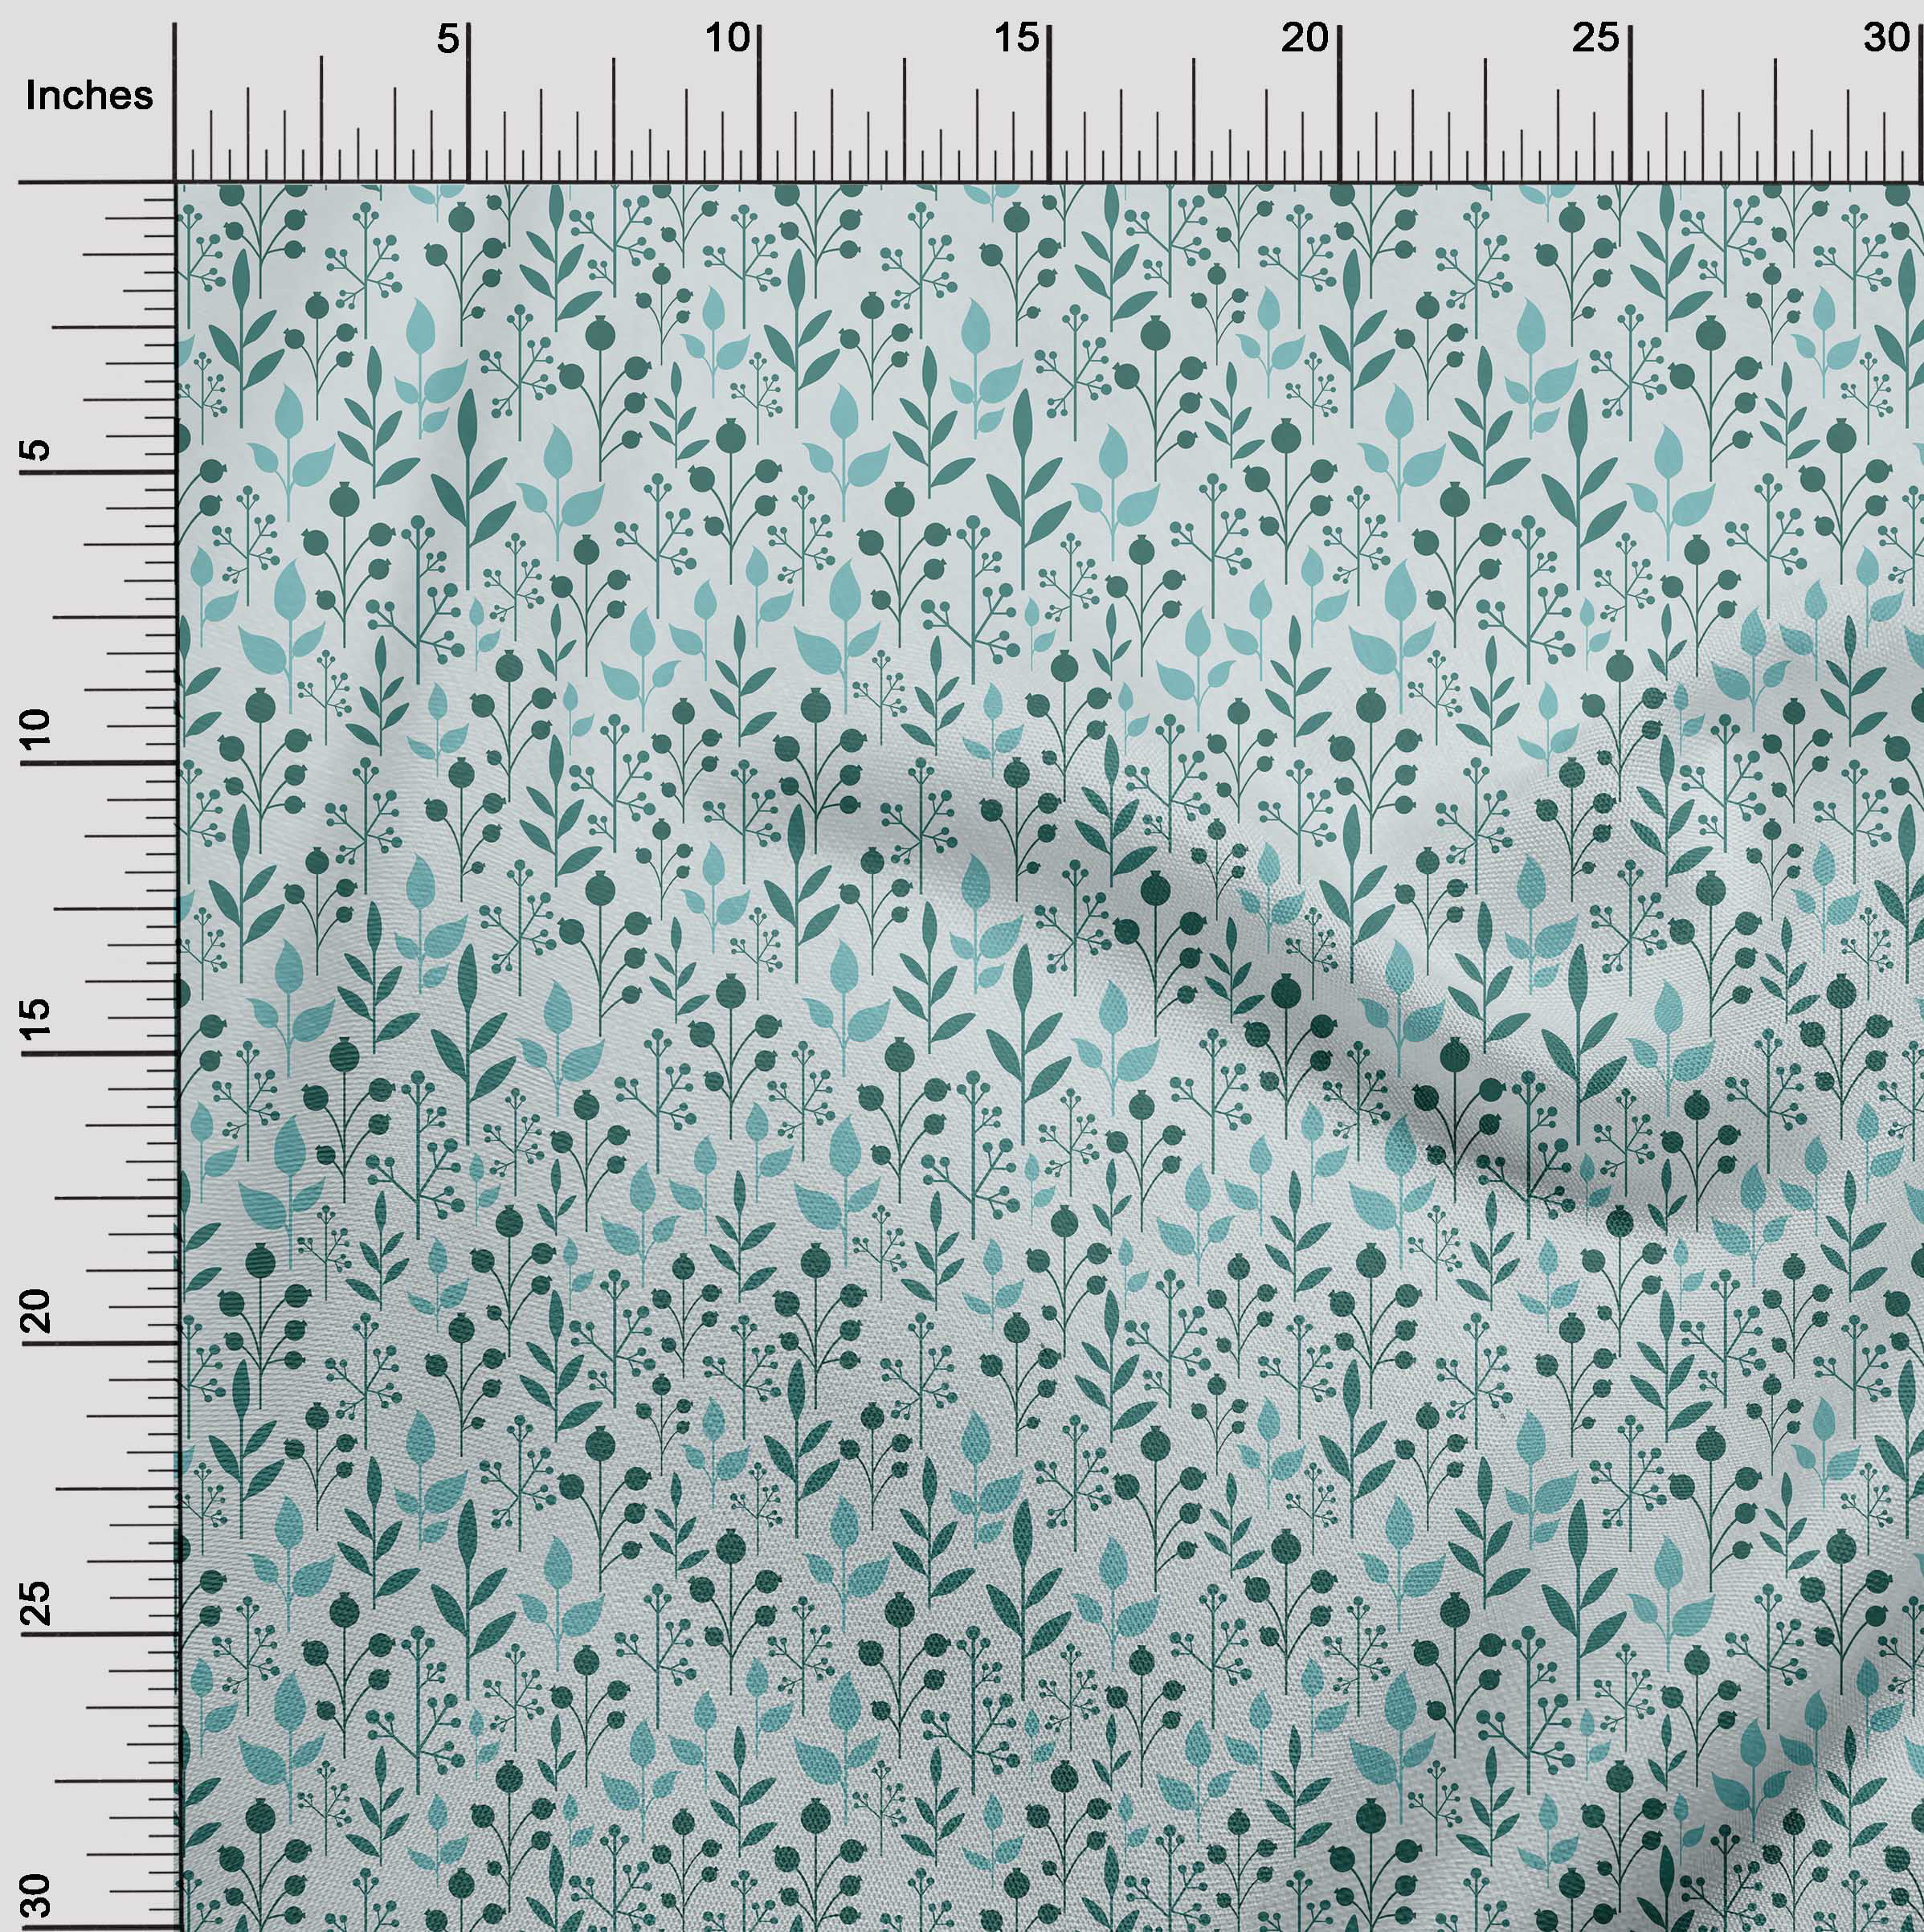 oneOone Rayon Gray Fabric Floral & Tiles Moroccan Quilting Supplies Print  Sewing Fabric By The Yard 56 Inch Wide 